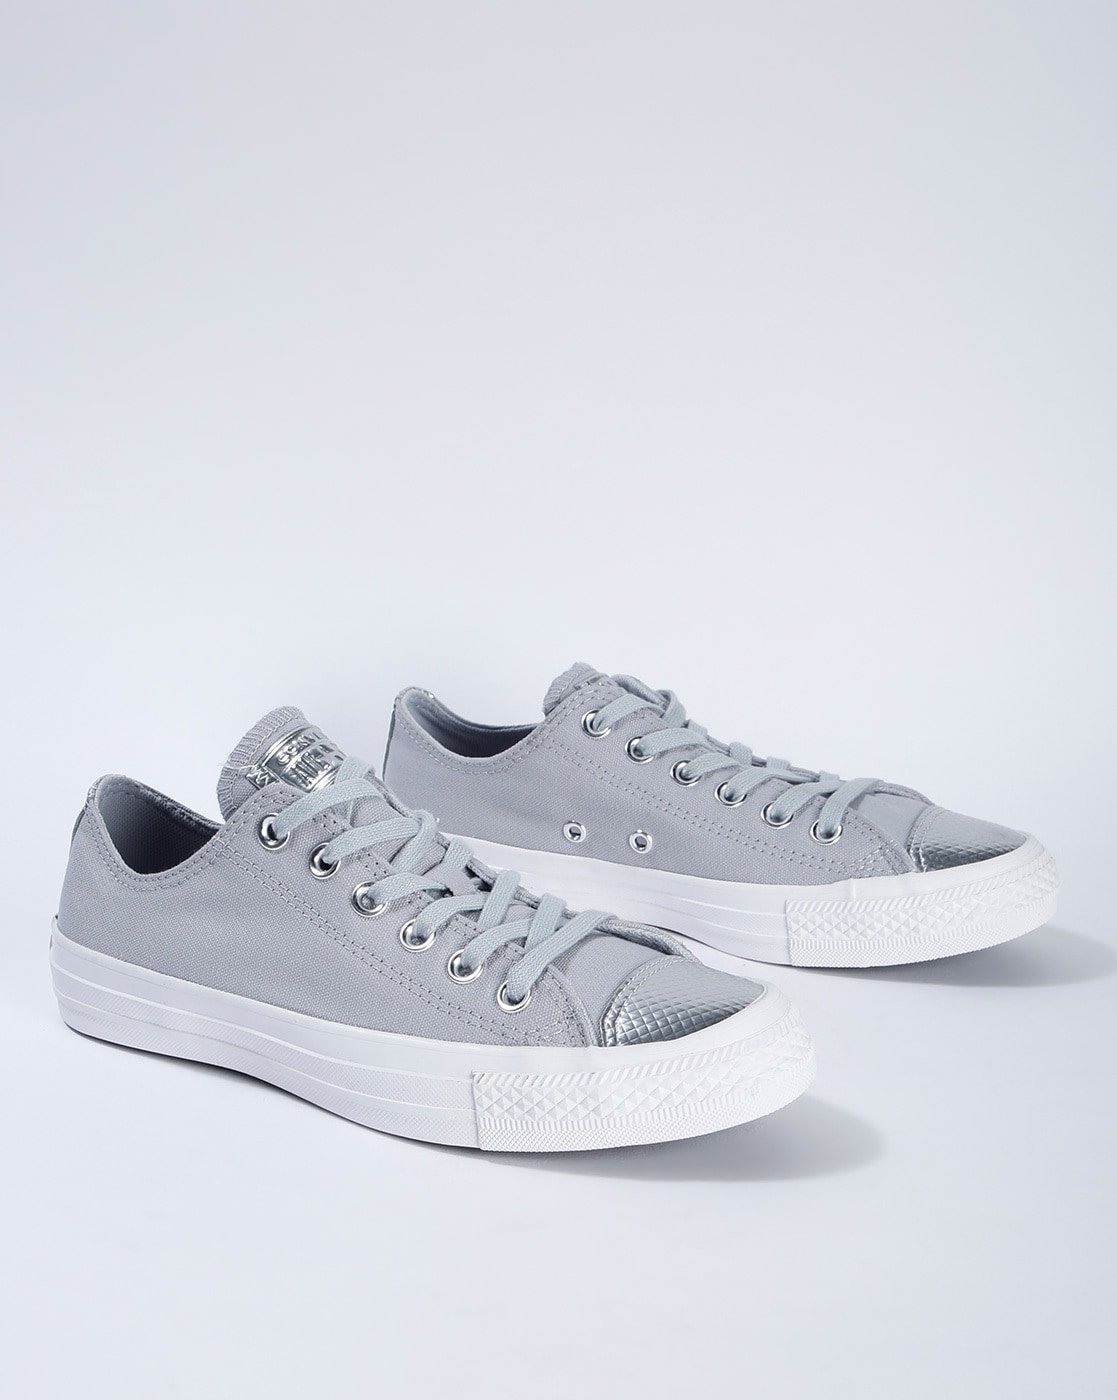 converse shoes discount india